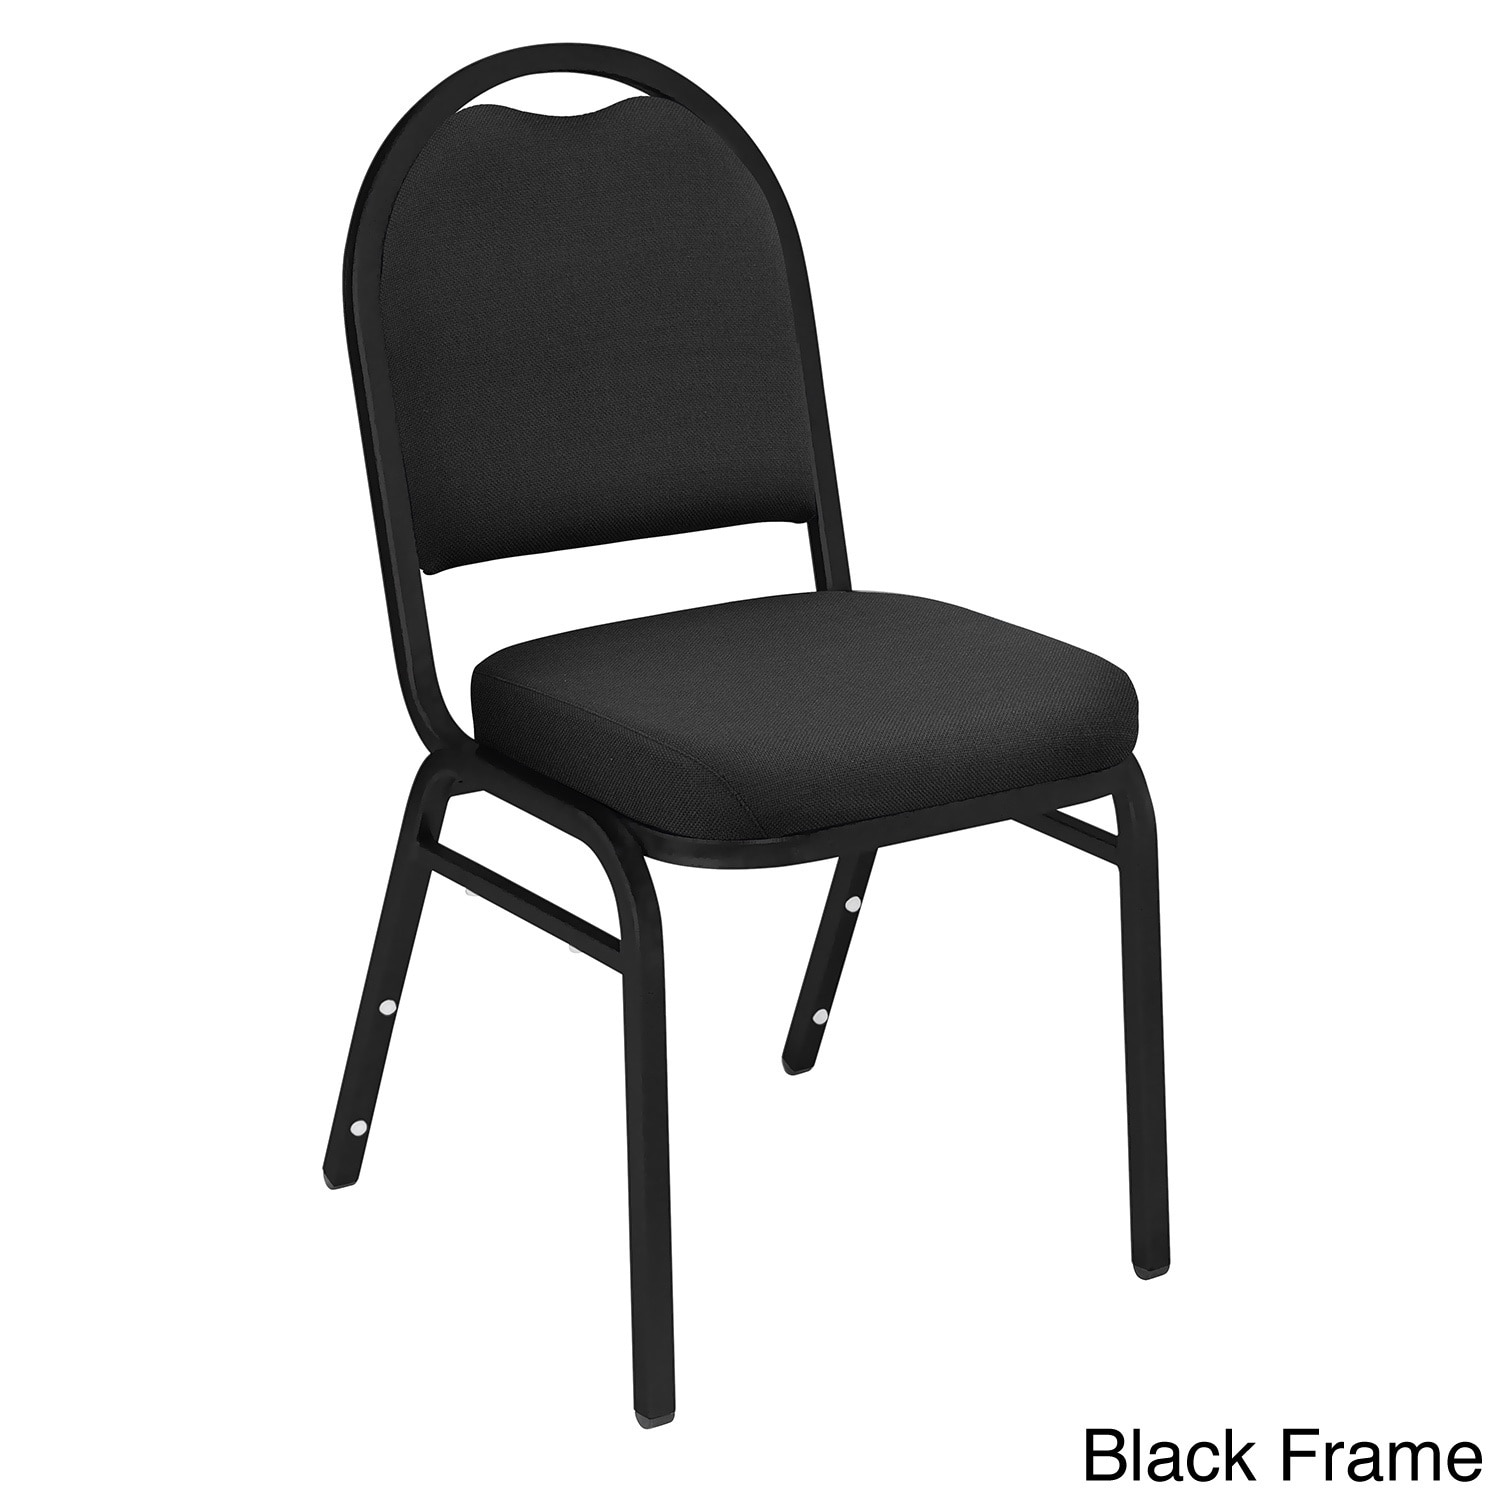 Dome Back Fabric Padded Stack Chair